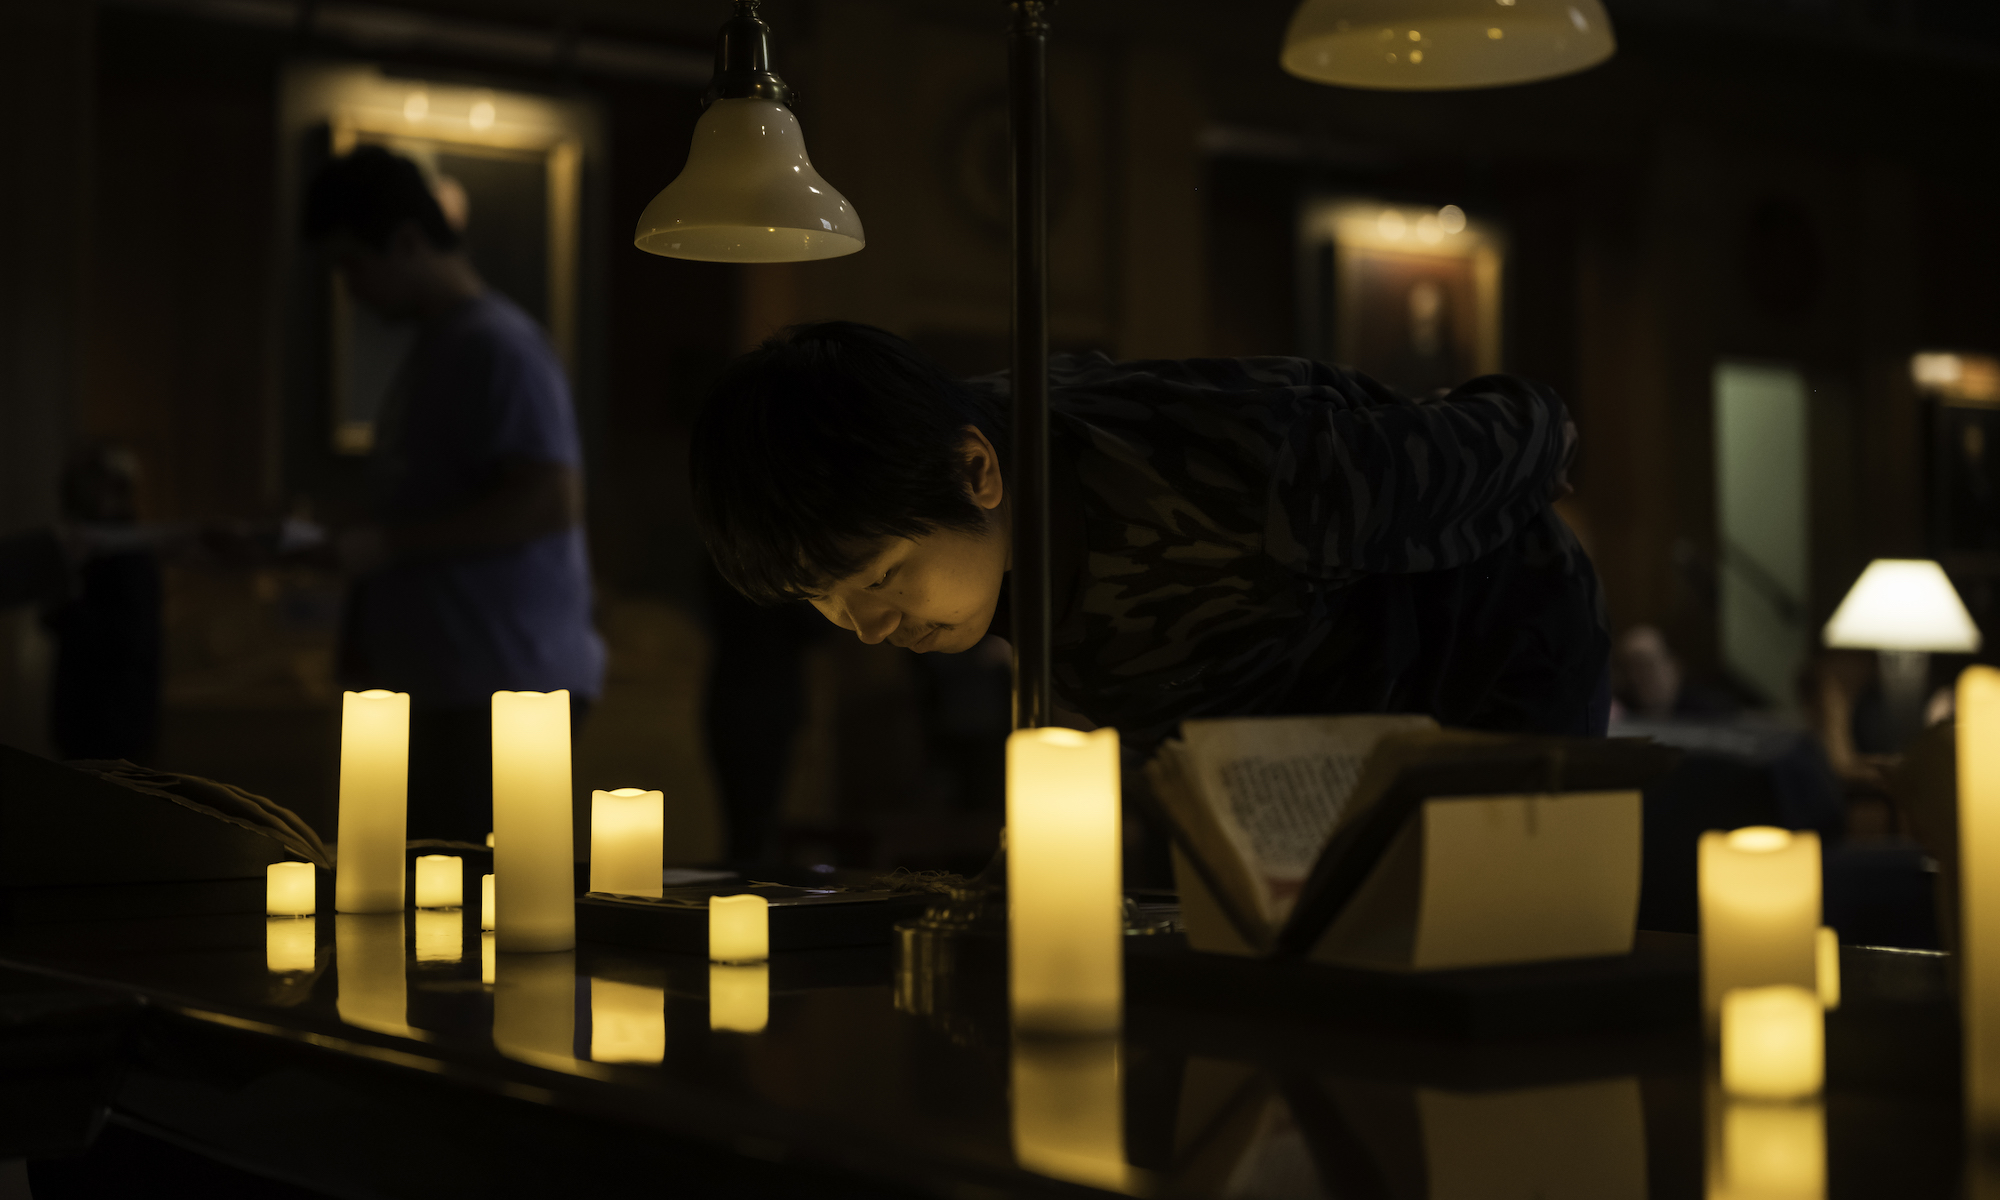 A person looks over an old manuscript in a room lit only by electric candles